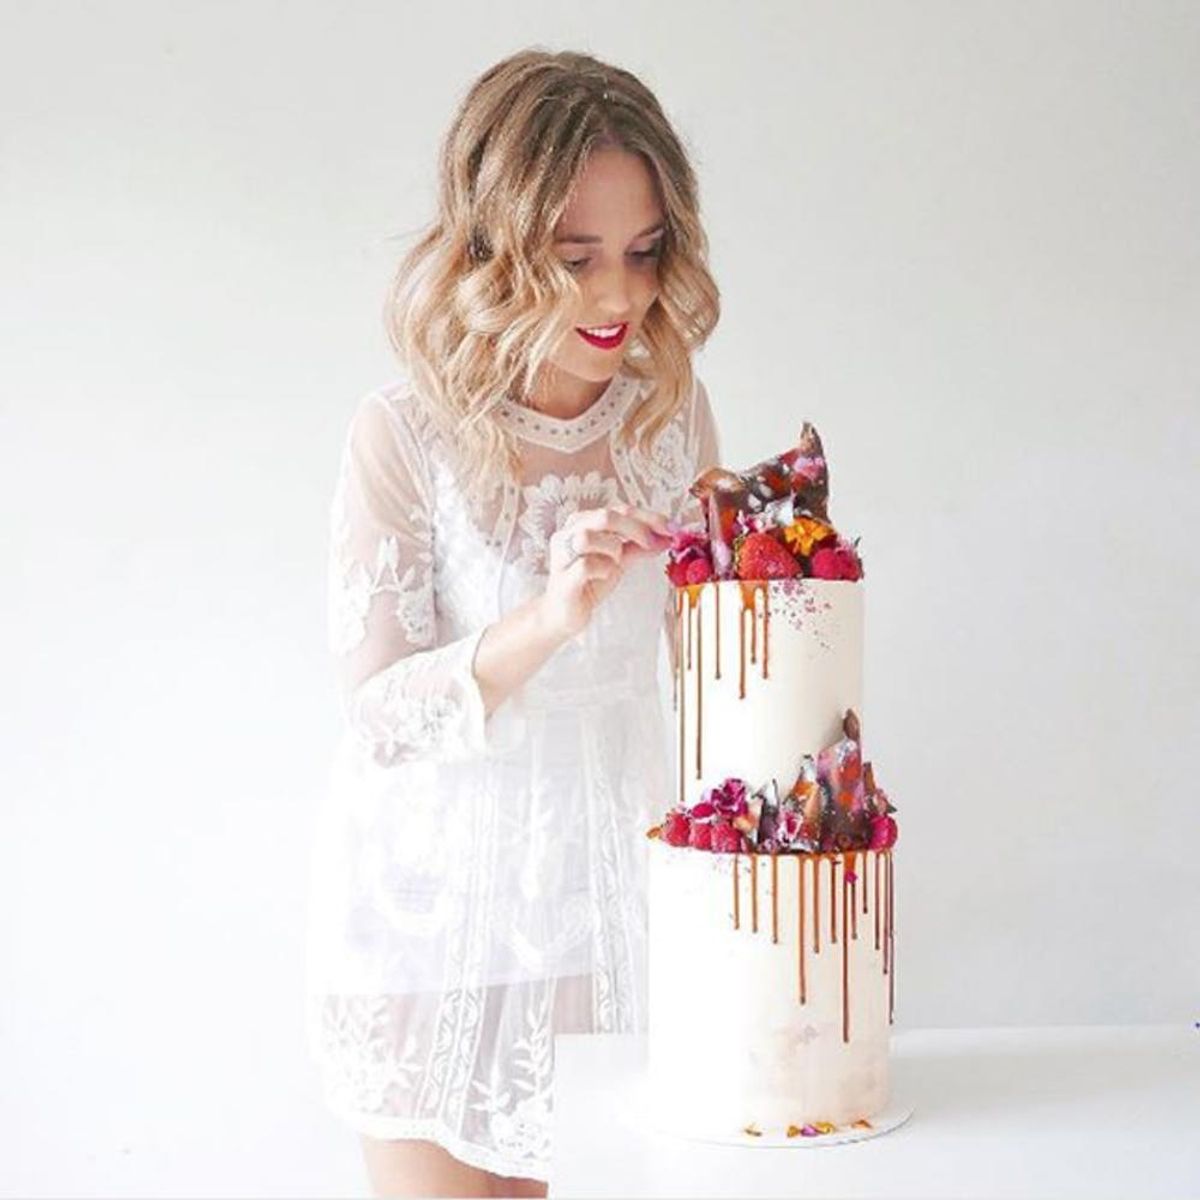 21 Wedding Cake Bakers Every Bride Needs to Follow on Instagram